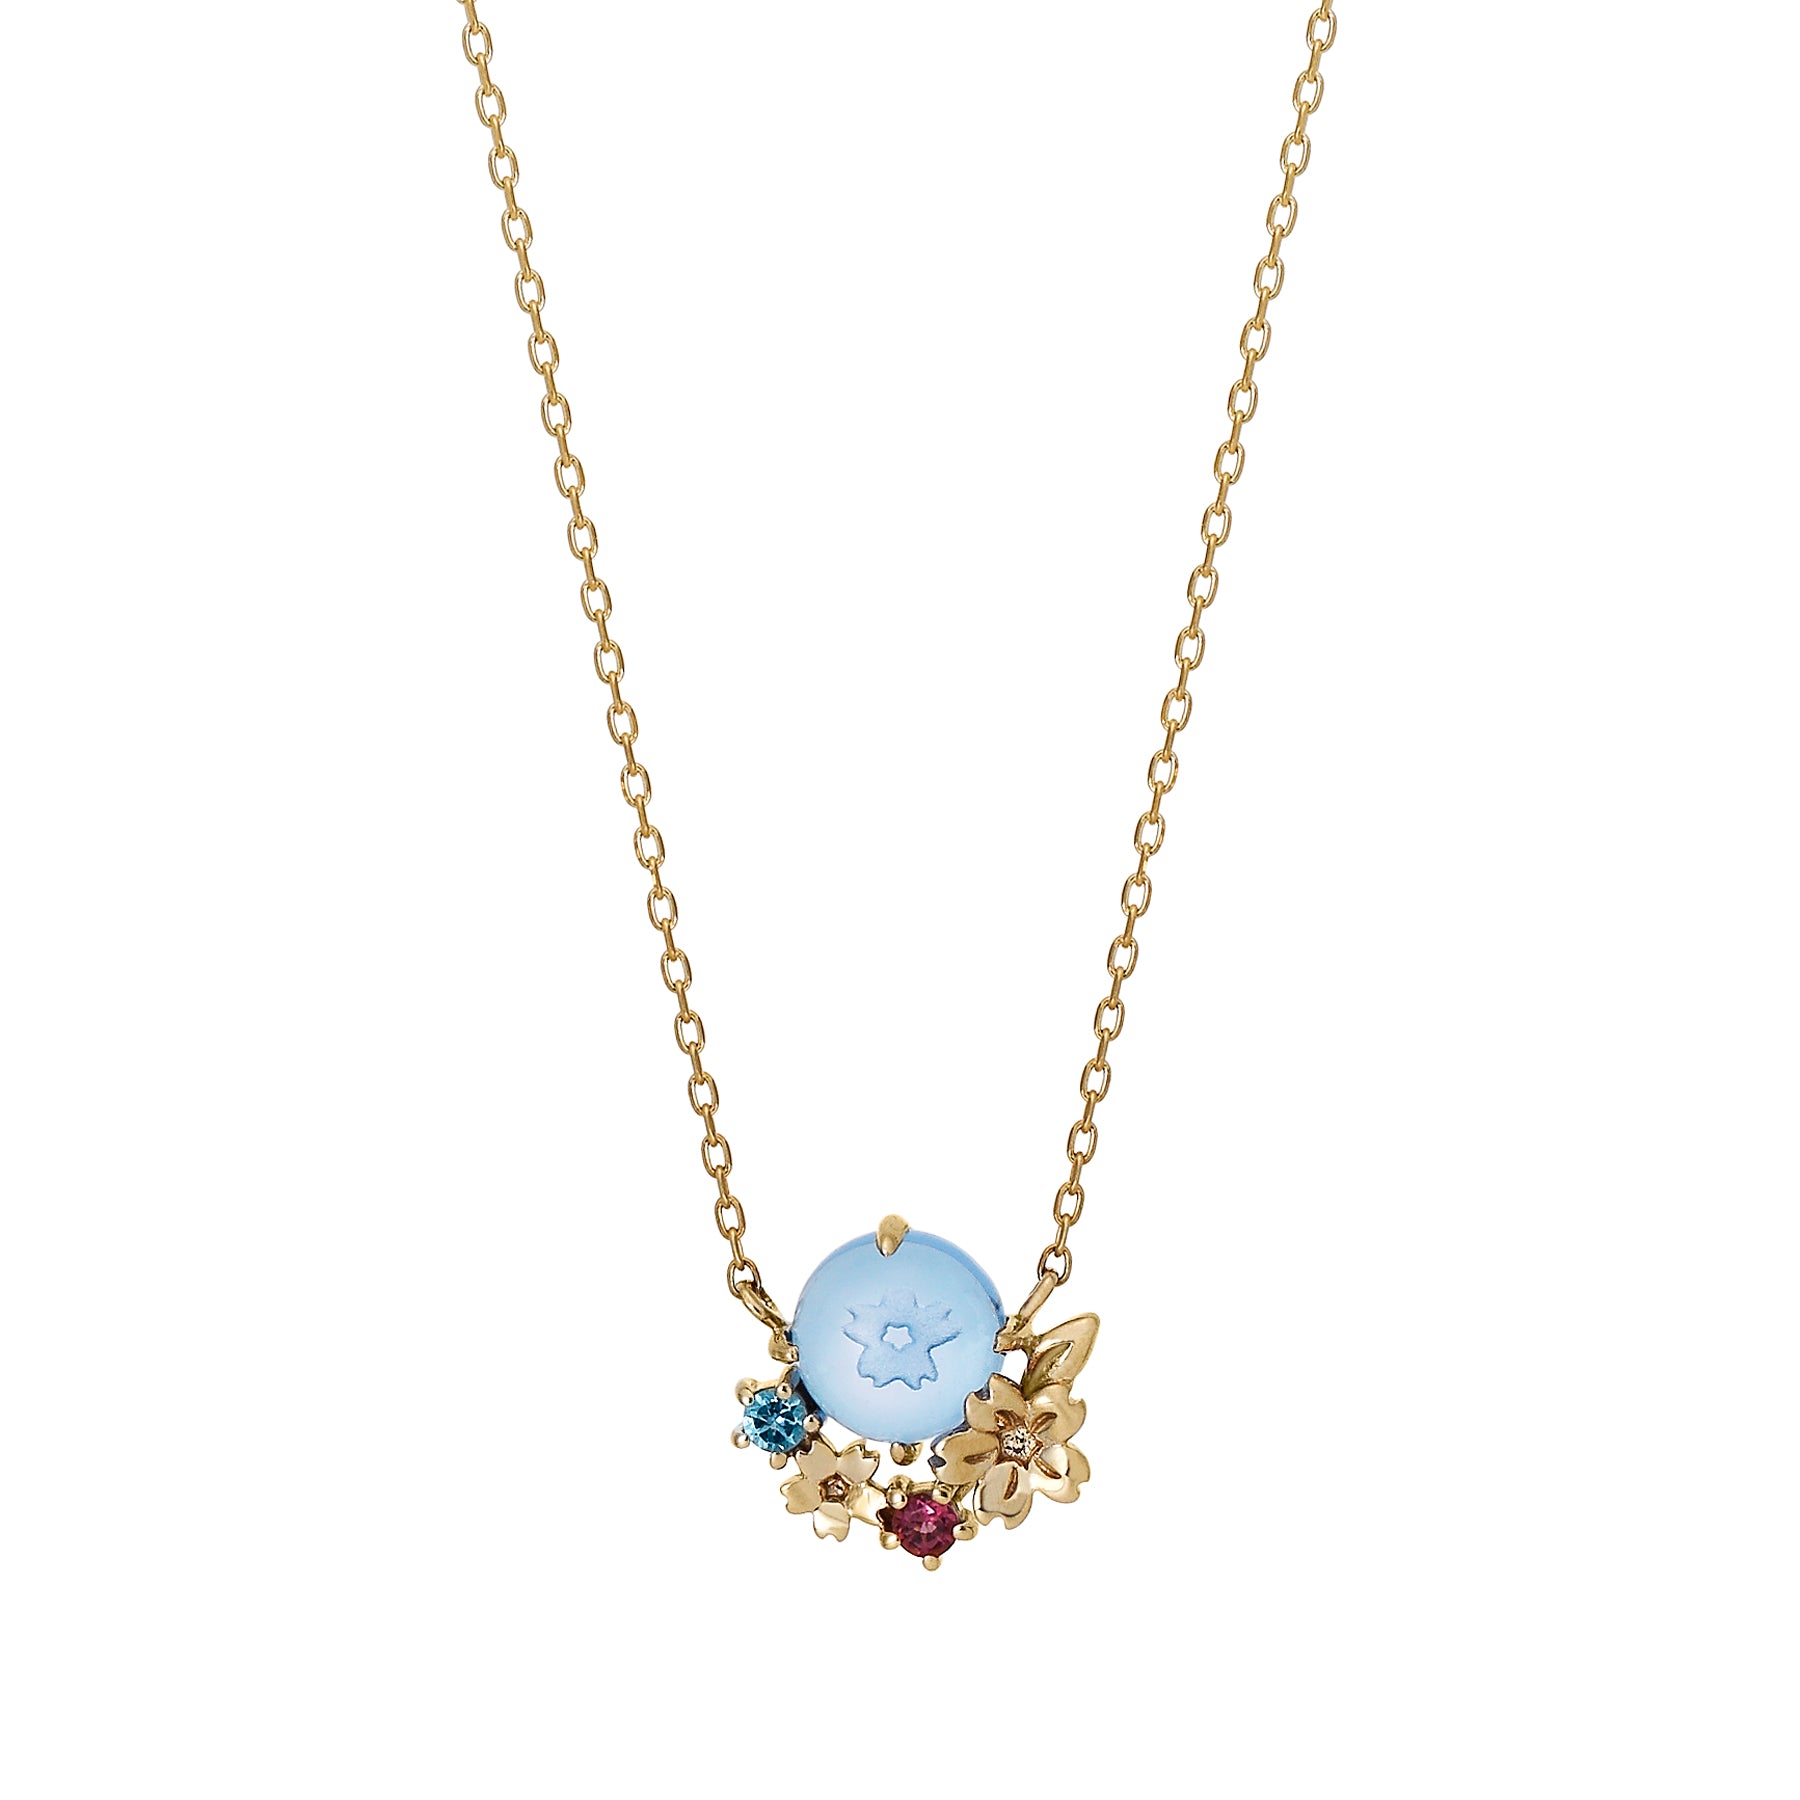 [Birth Flower Jewelry] March Forget-me-not Necklace - Product Image